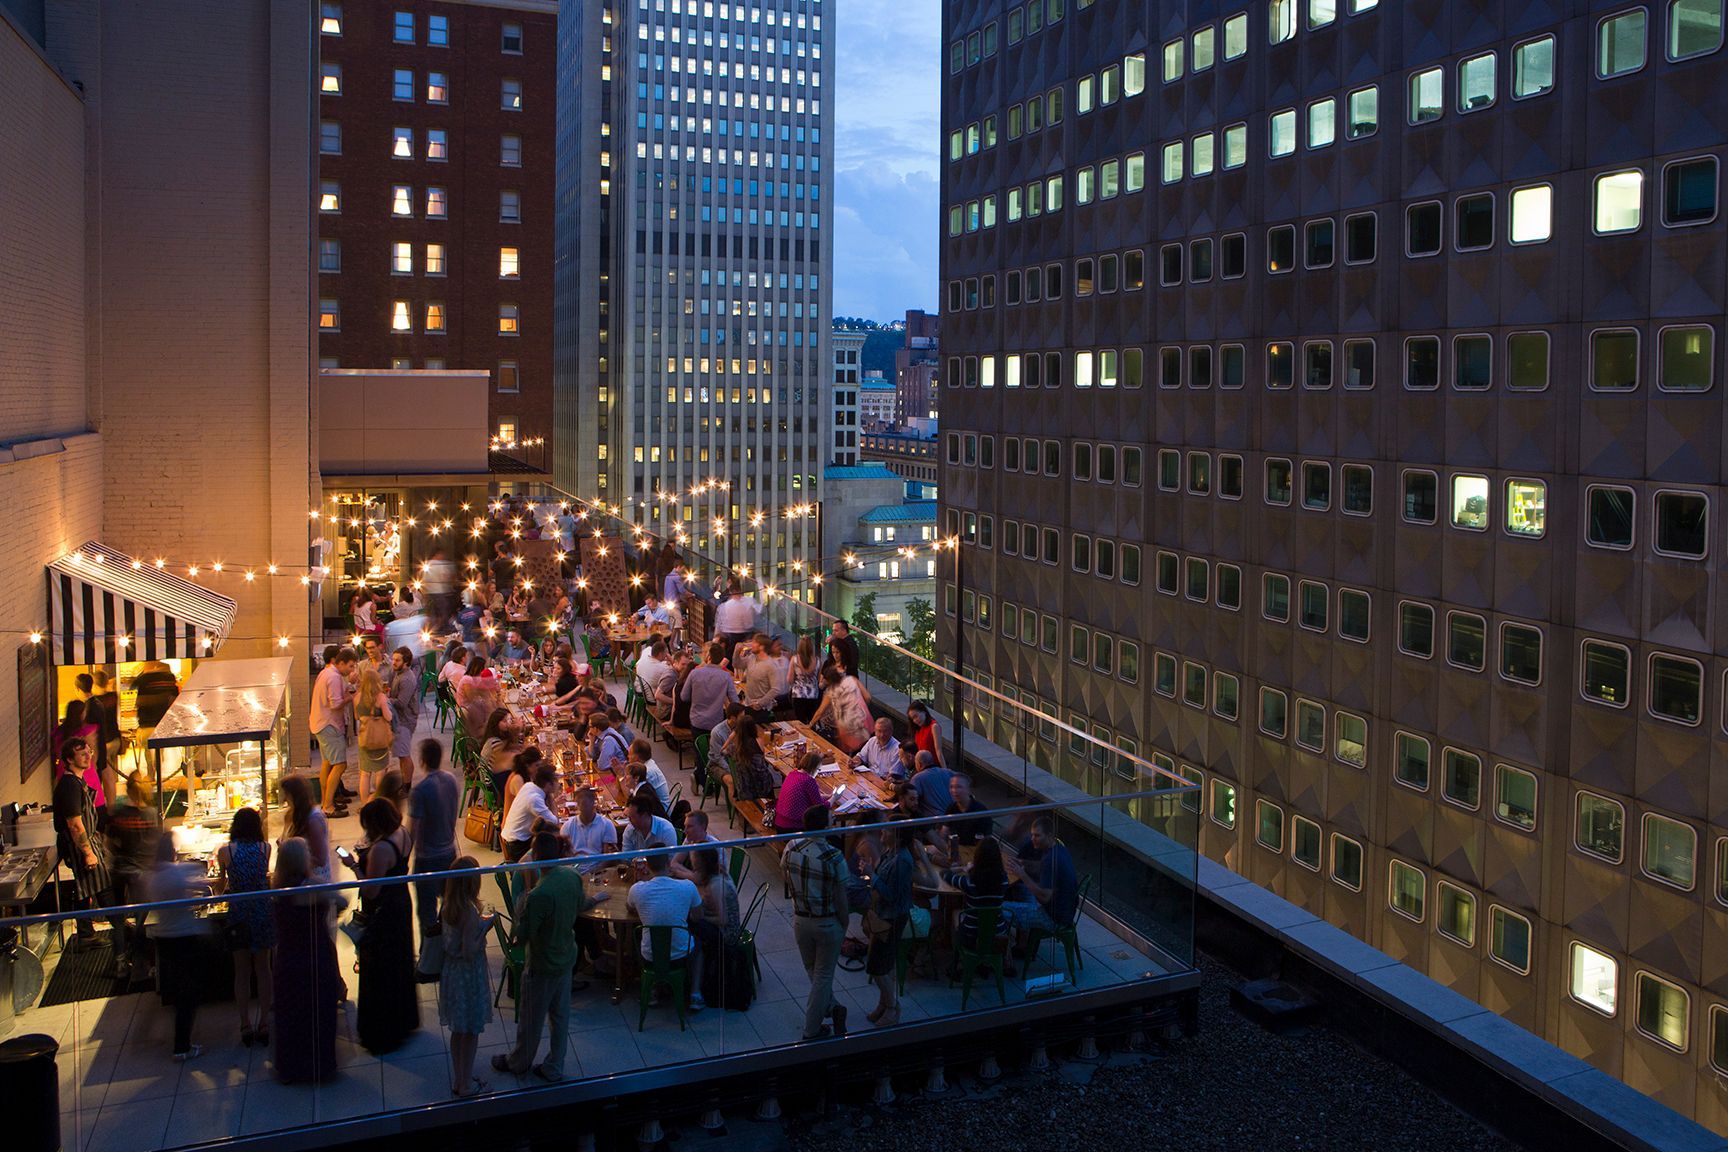 A photo of people dining and drinking at the Biergarten rooftop bar.